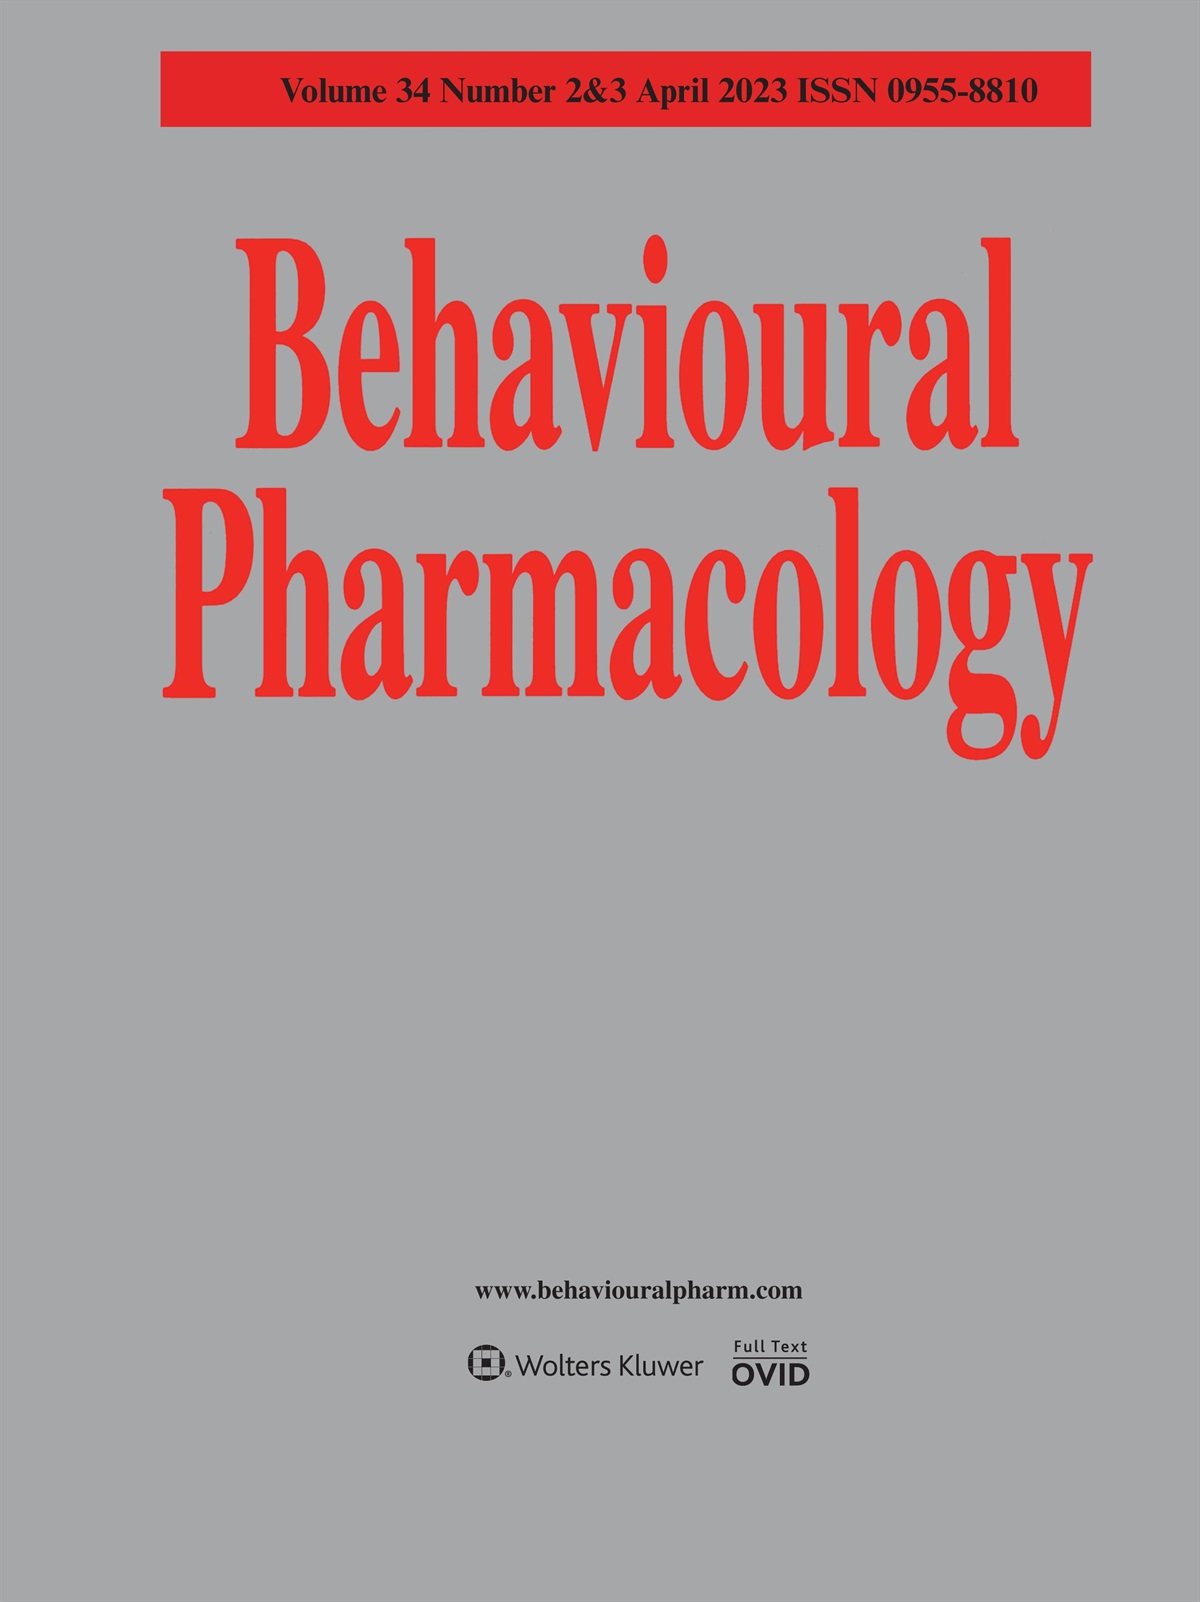 Announcement of two Special Issues:‘Behavioural pharmacology of pain’ and ‘Sex differences in behavioural pharmacology’